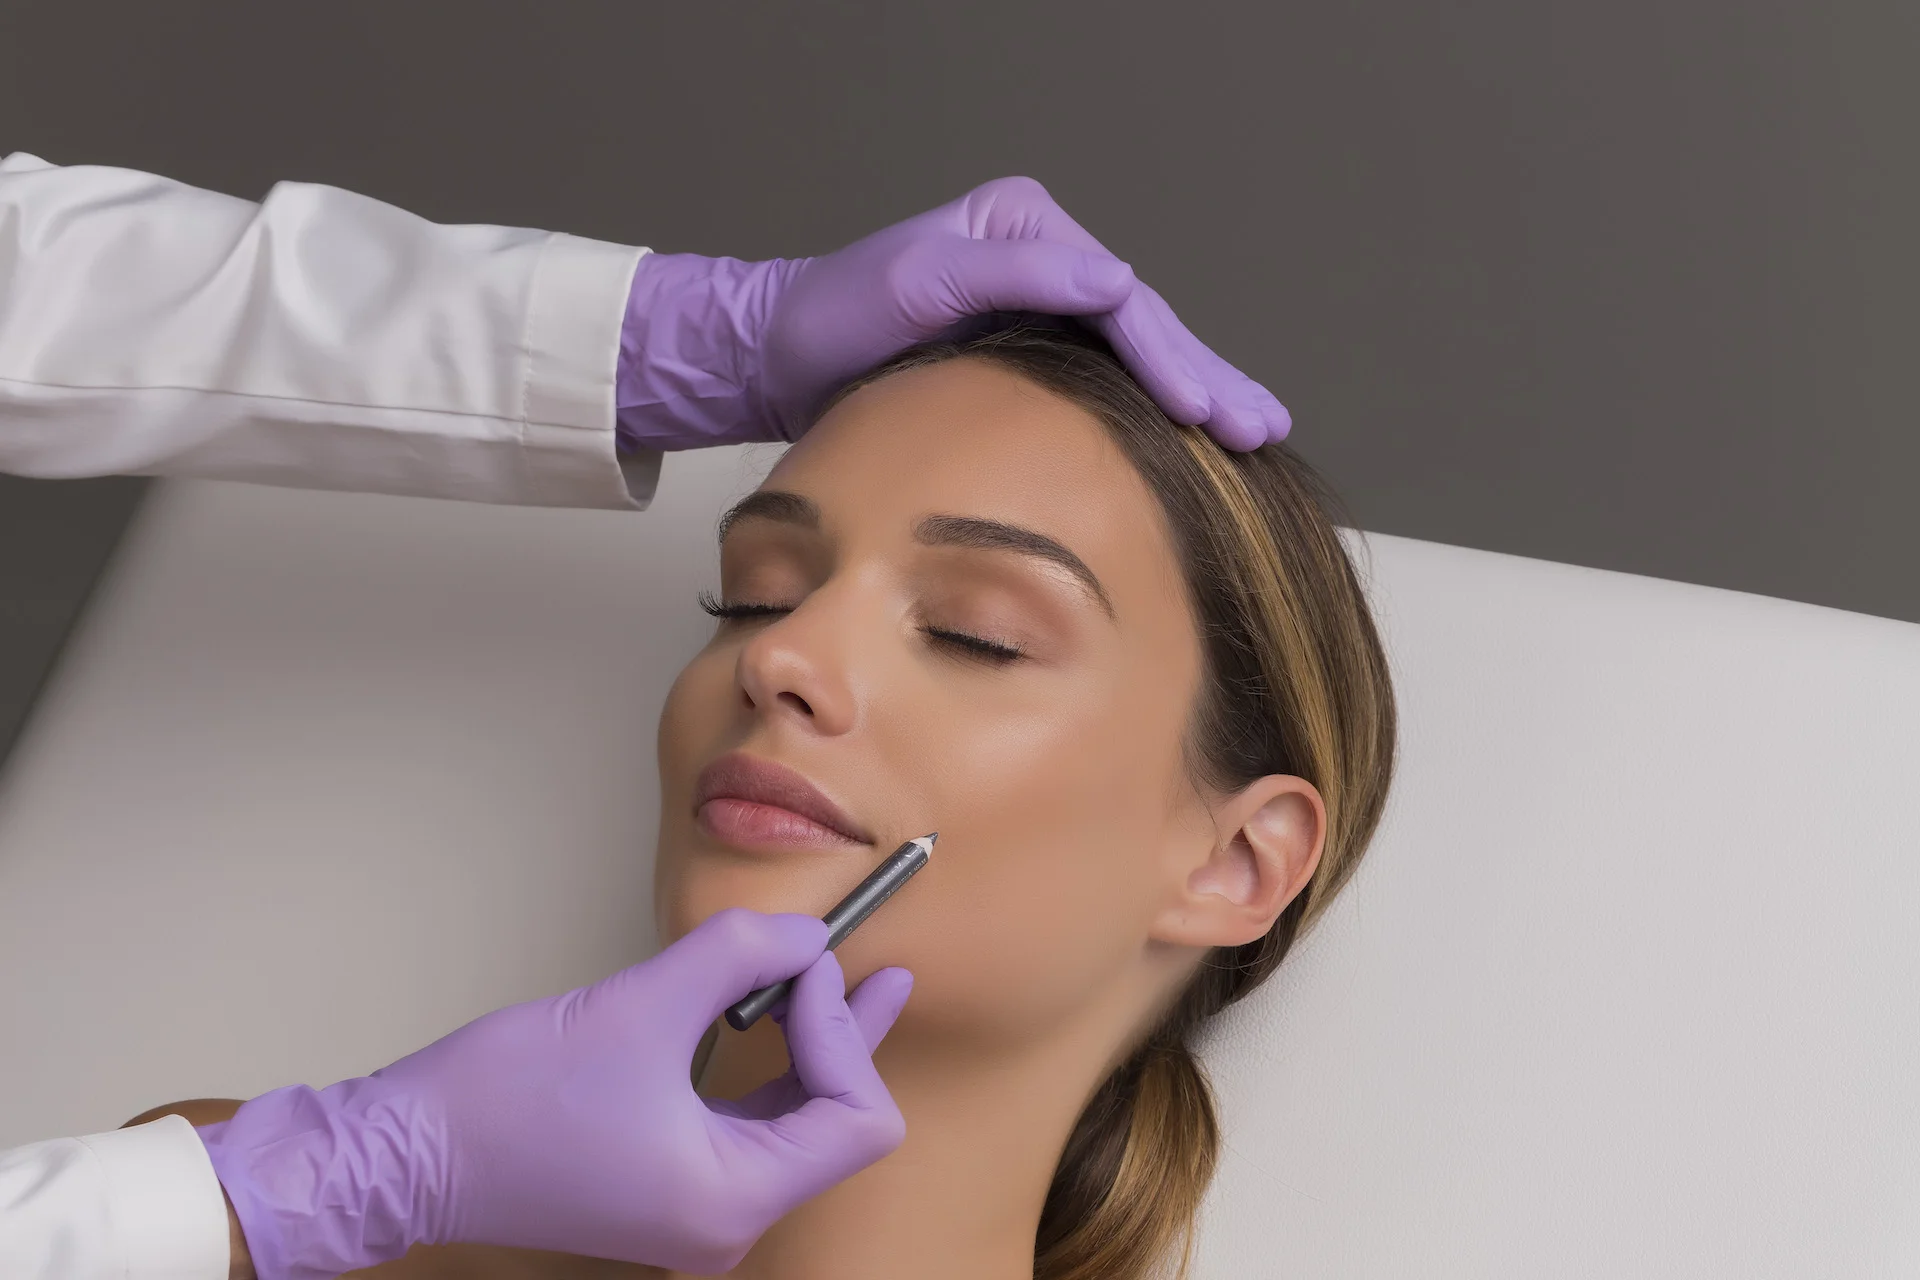 Lip fillers for plumper, smoother and fuller-looking lips - improve the look of your lips and reduce fine lines with this long-lasting injectable treatment.